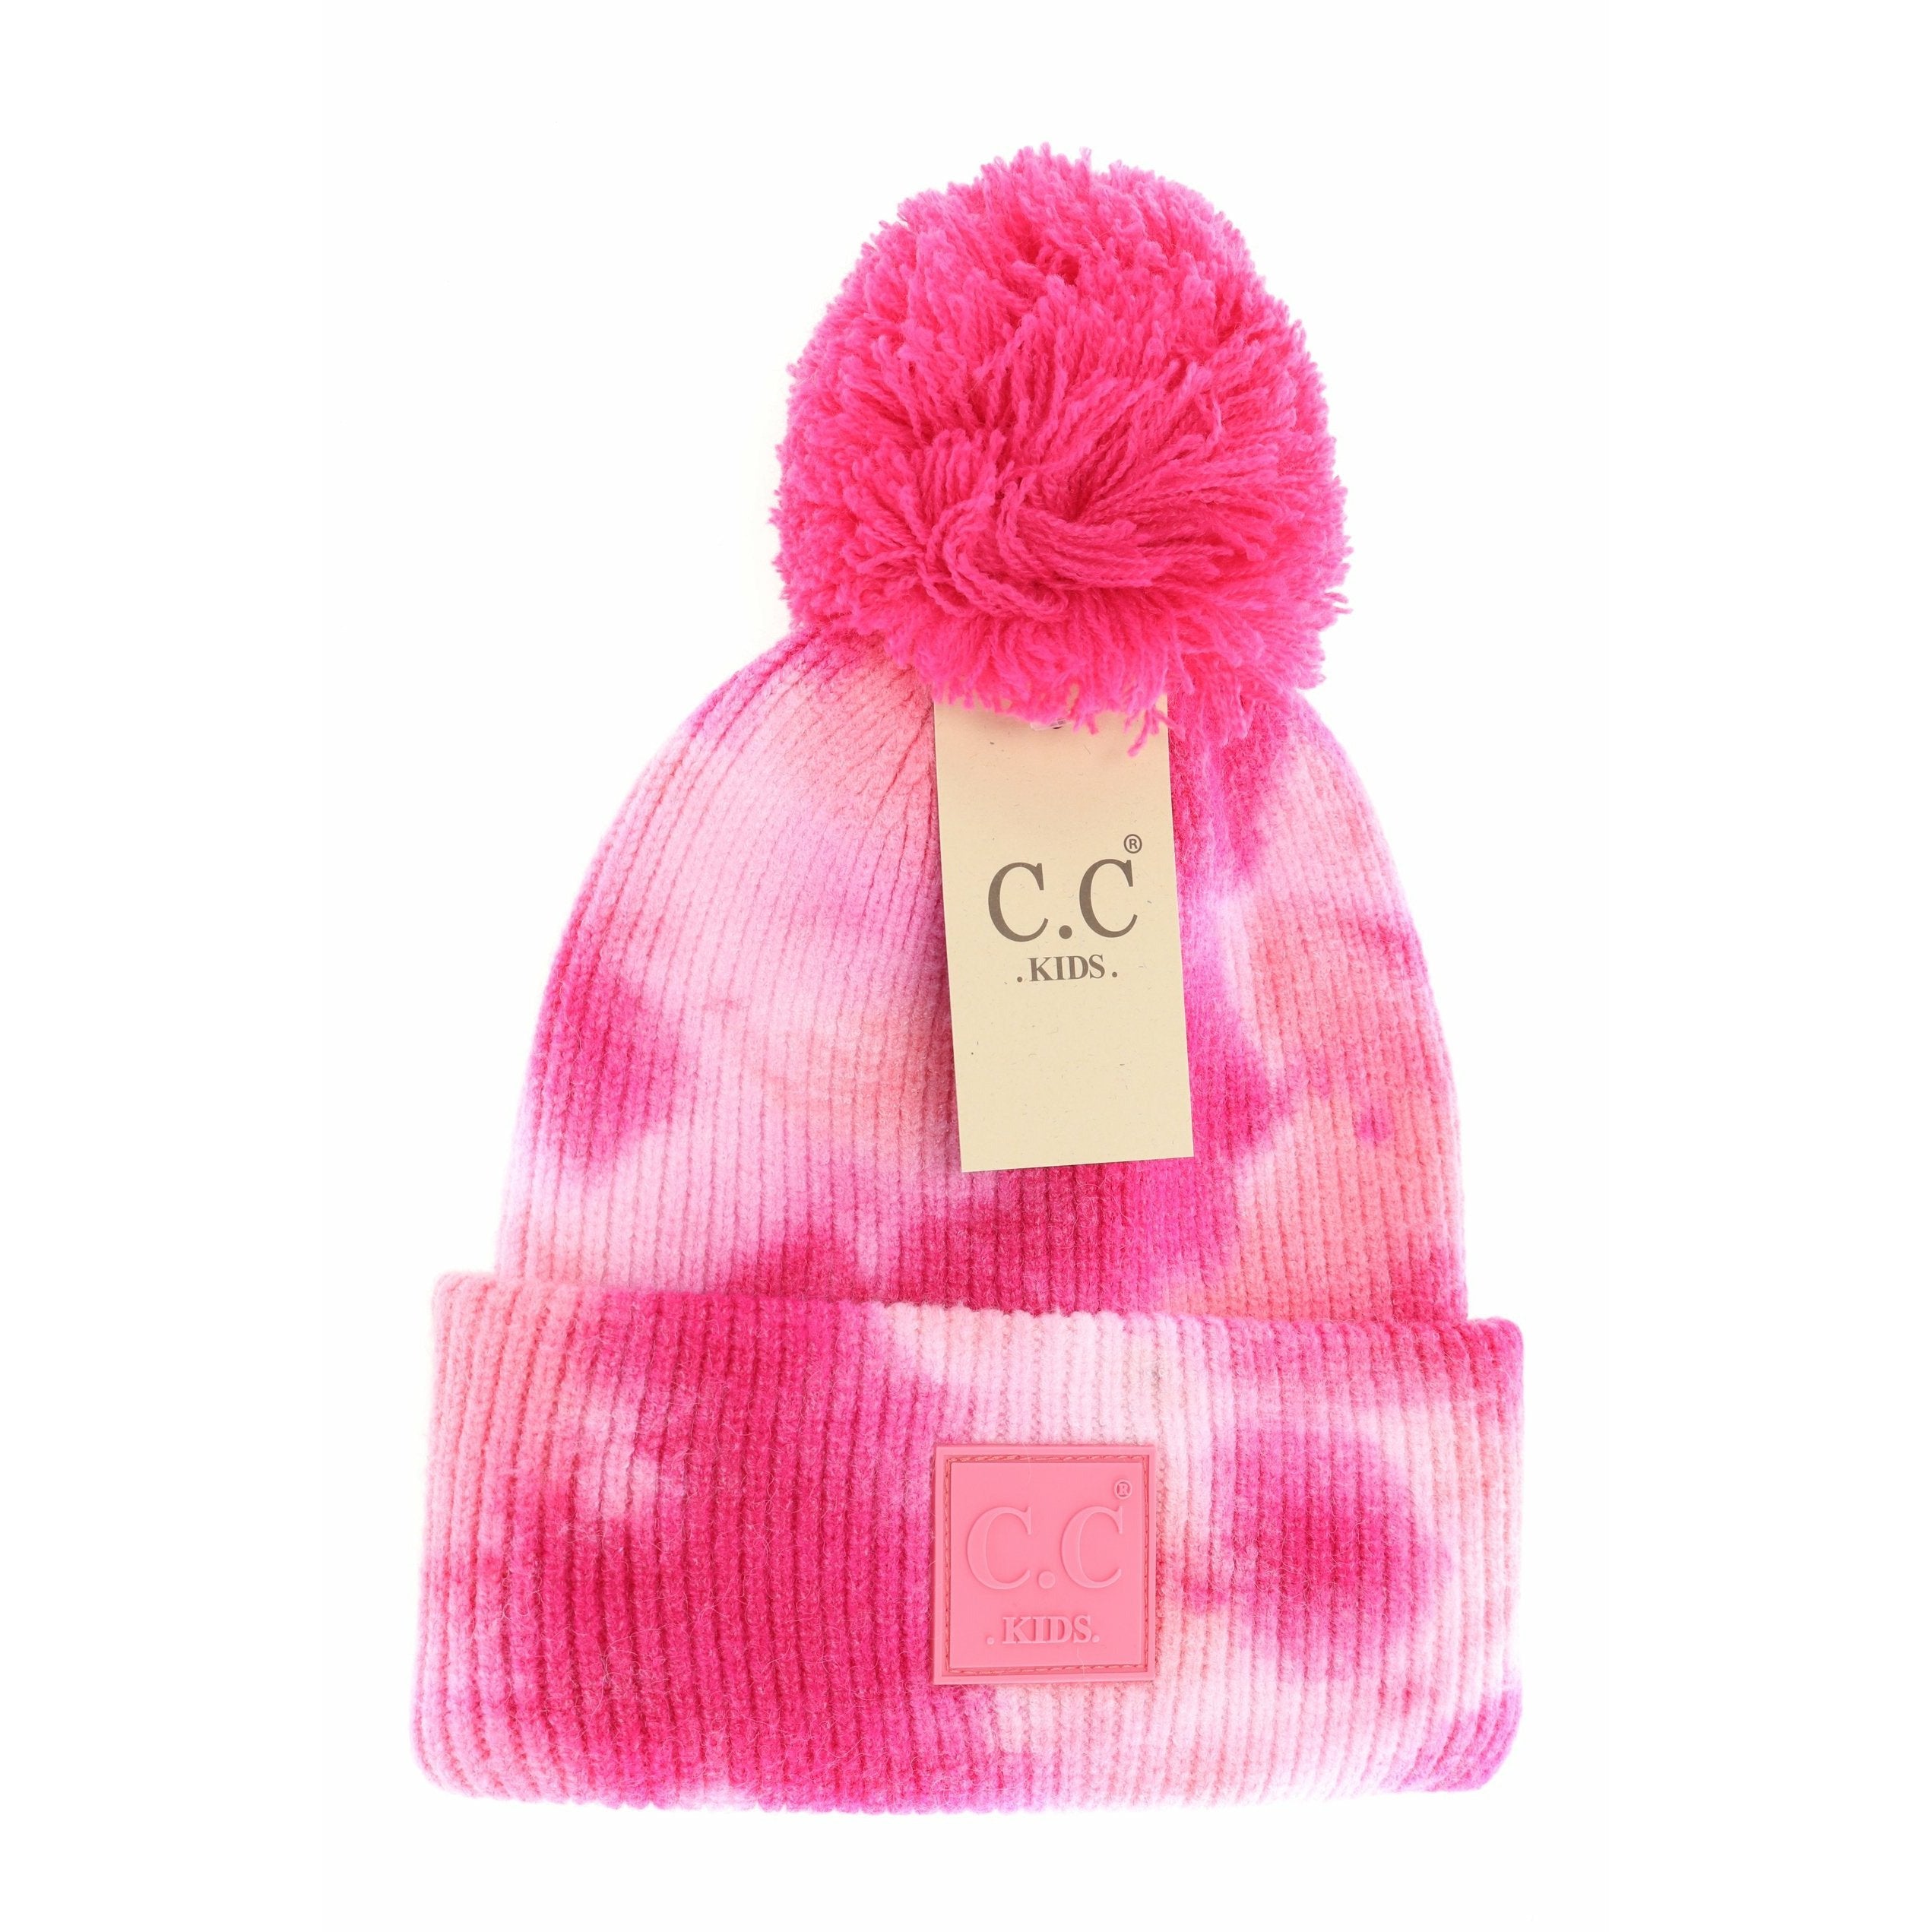 Kids Tie Dye Pom hats (multiple colors)  A Touch of Magnolia Boutique Fuchsia/pink  